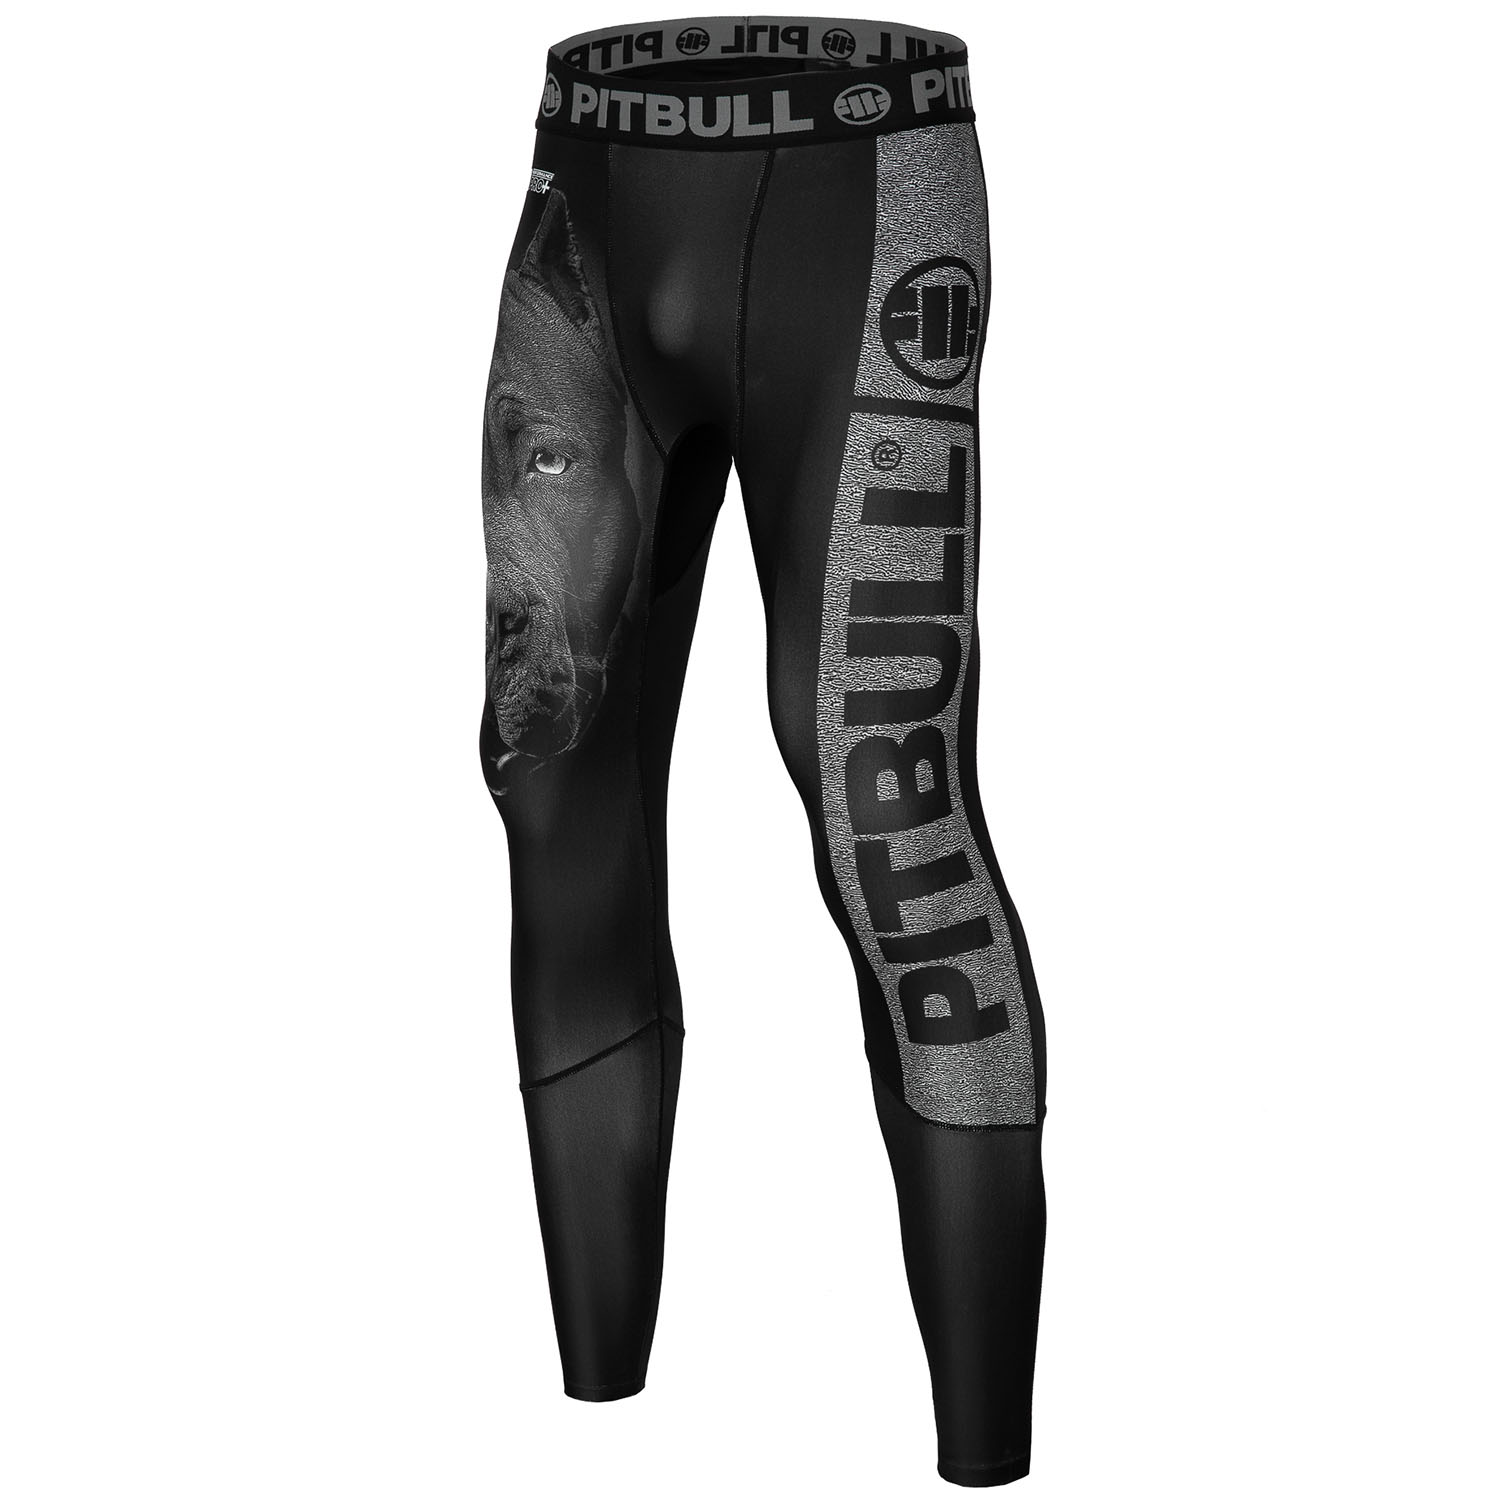 Pit Bull West Coast Compression Pants, Born In 1989, black, S